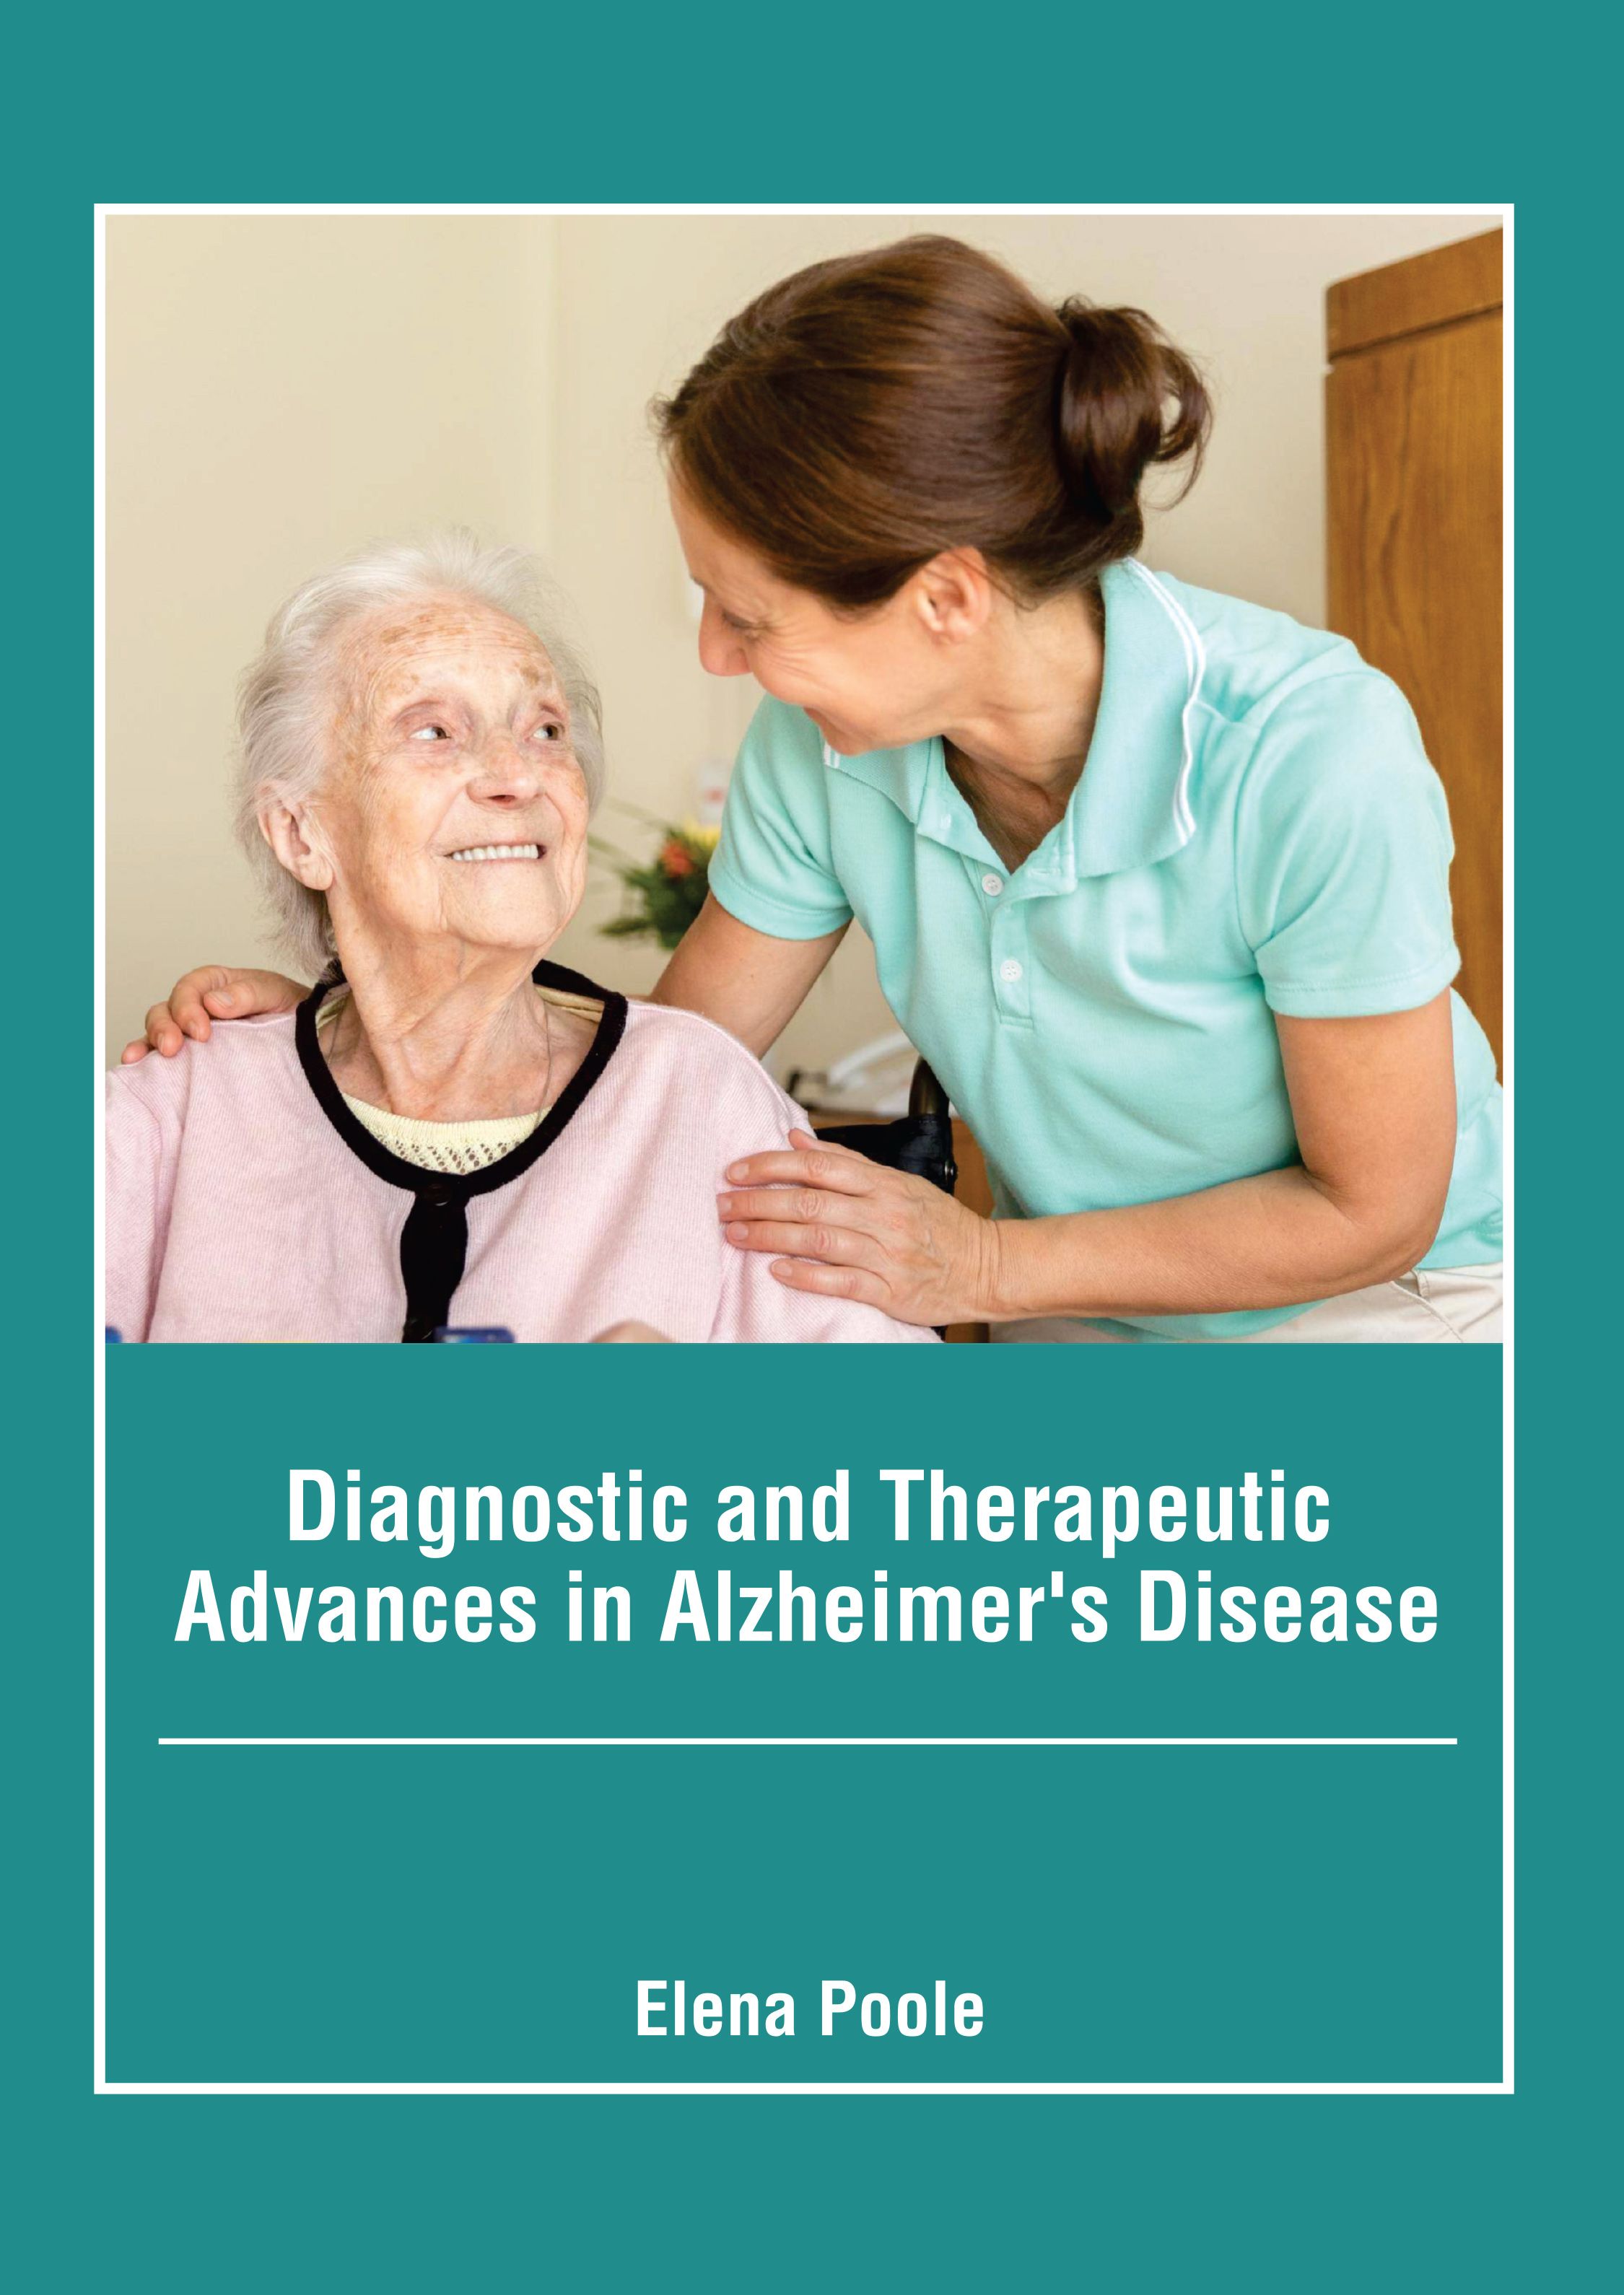 

exclusive-publishers/american-medical-publishers/diagnostic-and-therapeutic-advances-in-alzheimer-s-disease-9781639276585